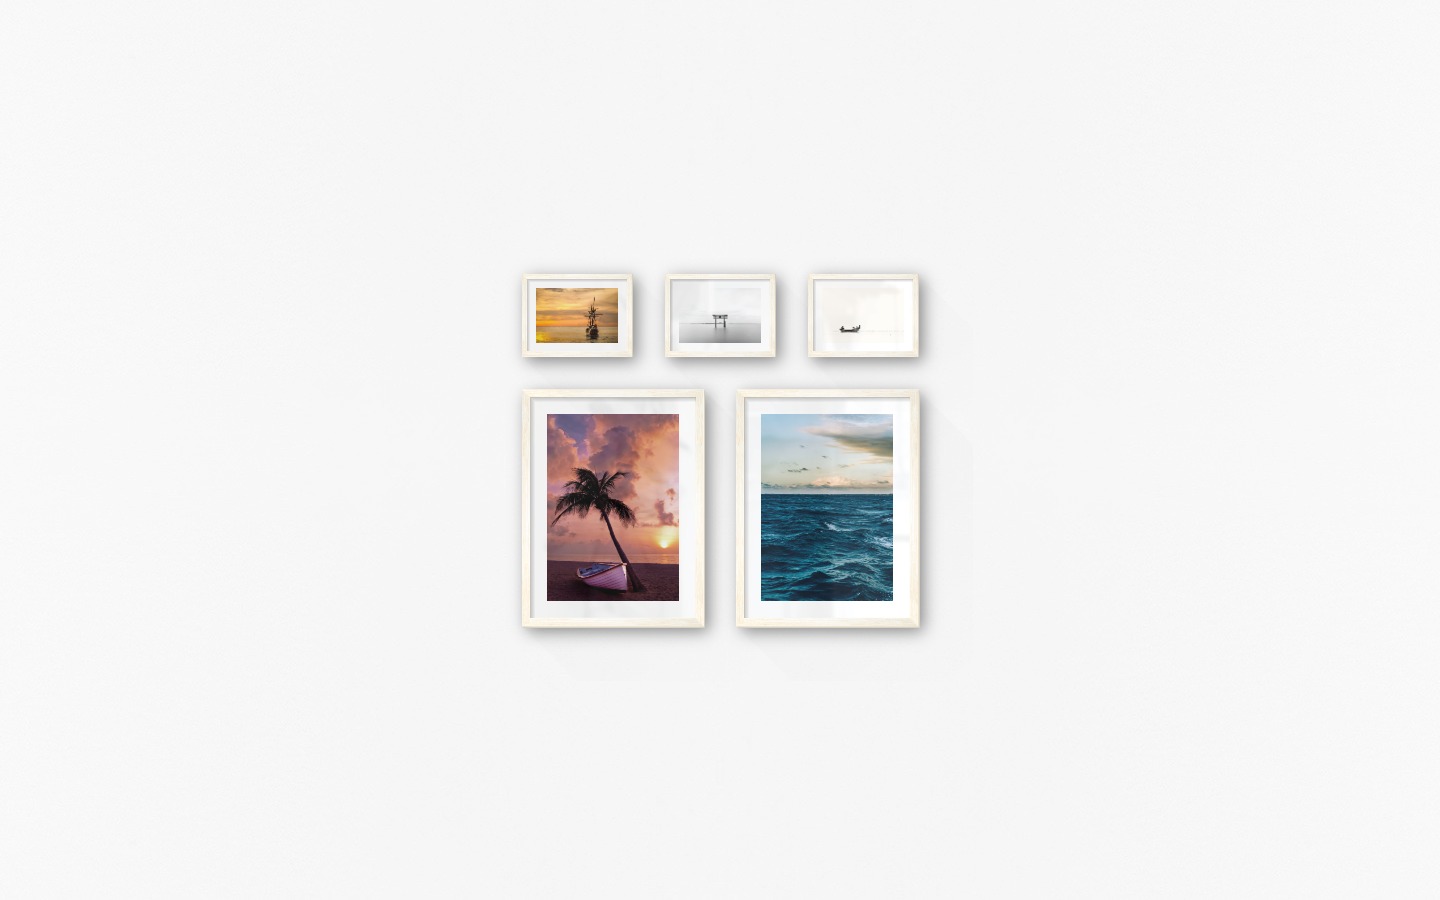 Gallery wall with picture frames in light wood in sizes 30x40 and 13x18 with prints "Palm on the beach", "Somewhat out at sea", "Ships at sea", "Pillars in the water" and "People in boat"